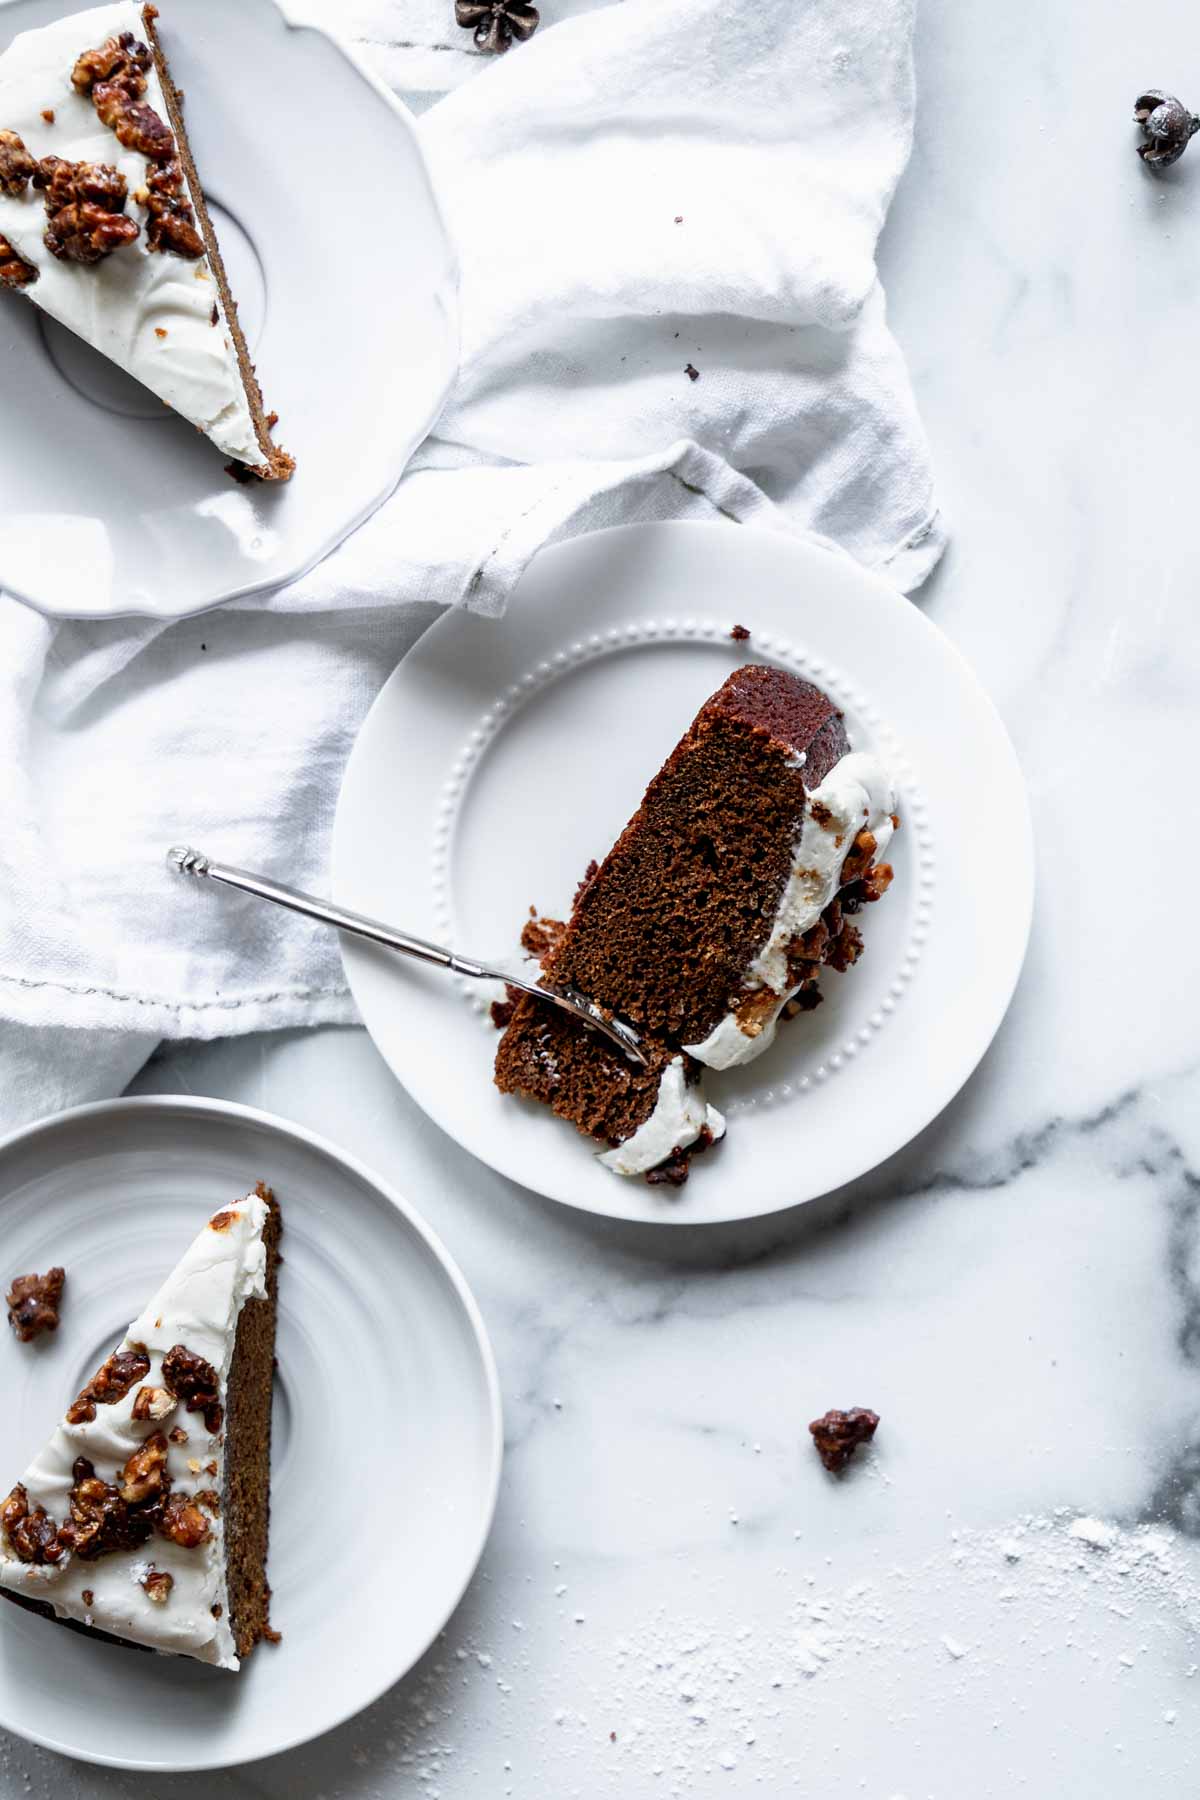 Single Layer Gingerbread Cake with Cream Cheese Frosting - a rich gingerbread with coffee in the batter for deep flavor!